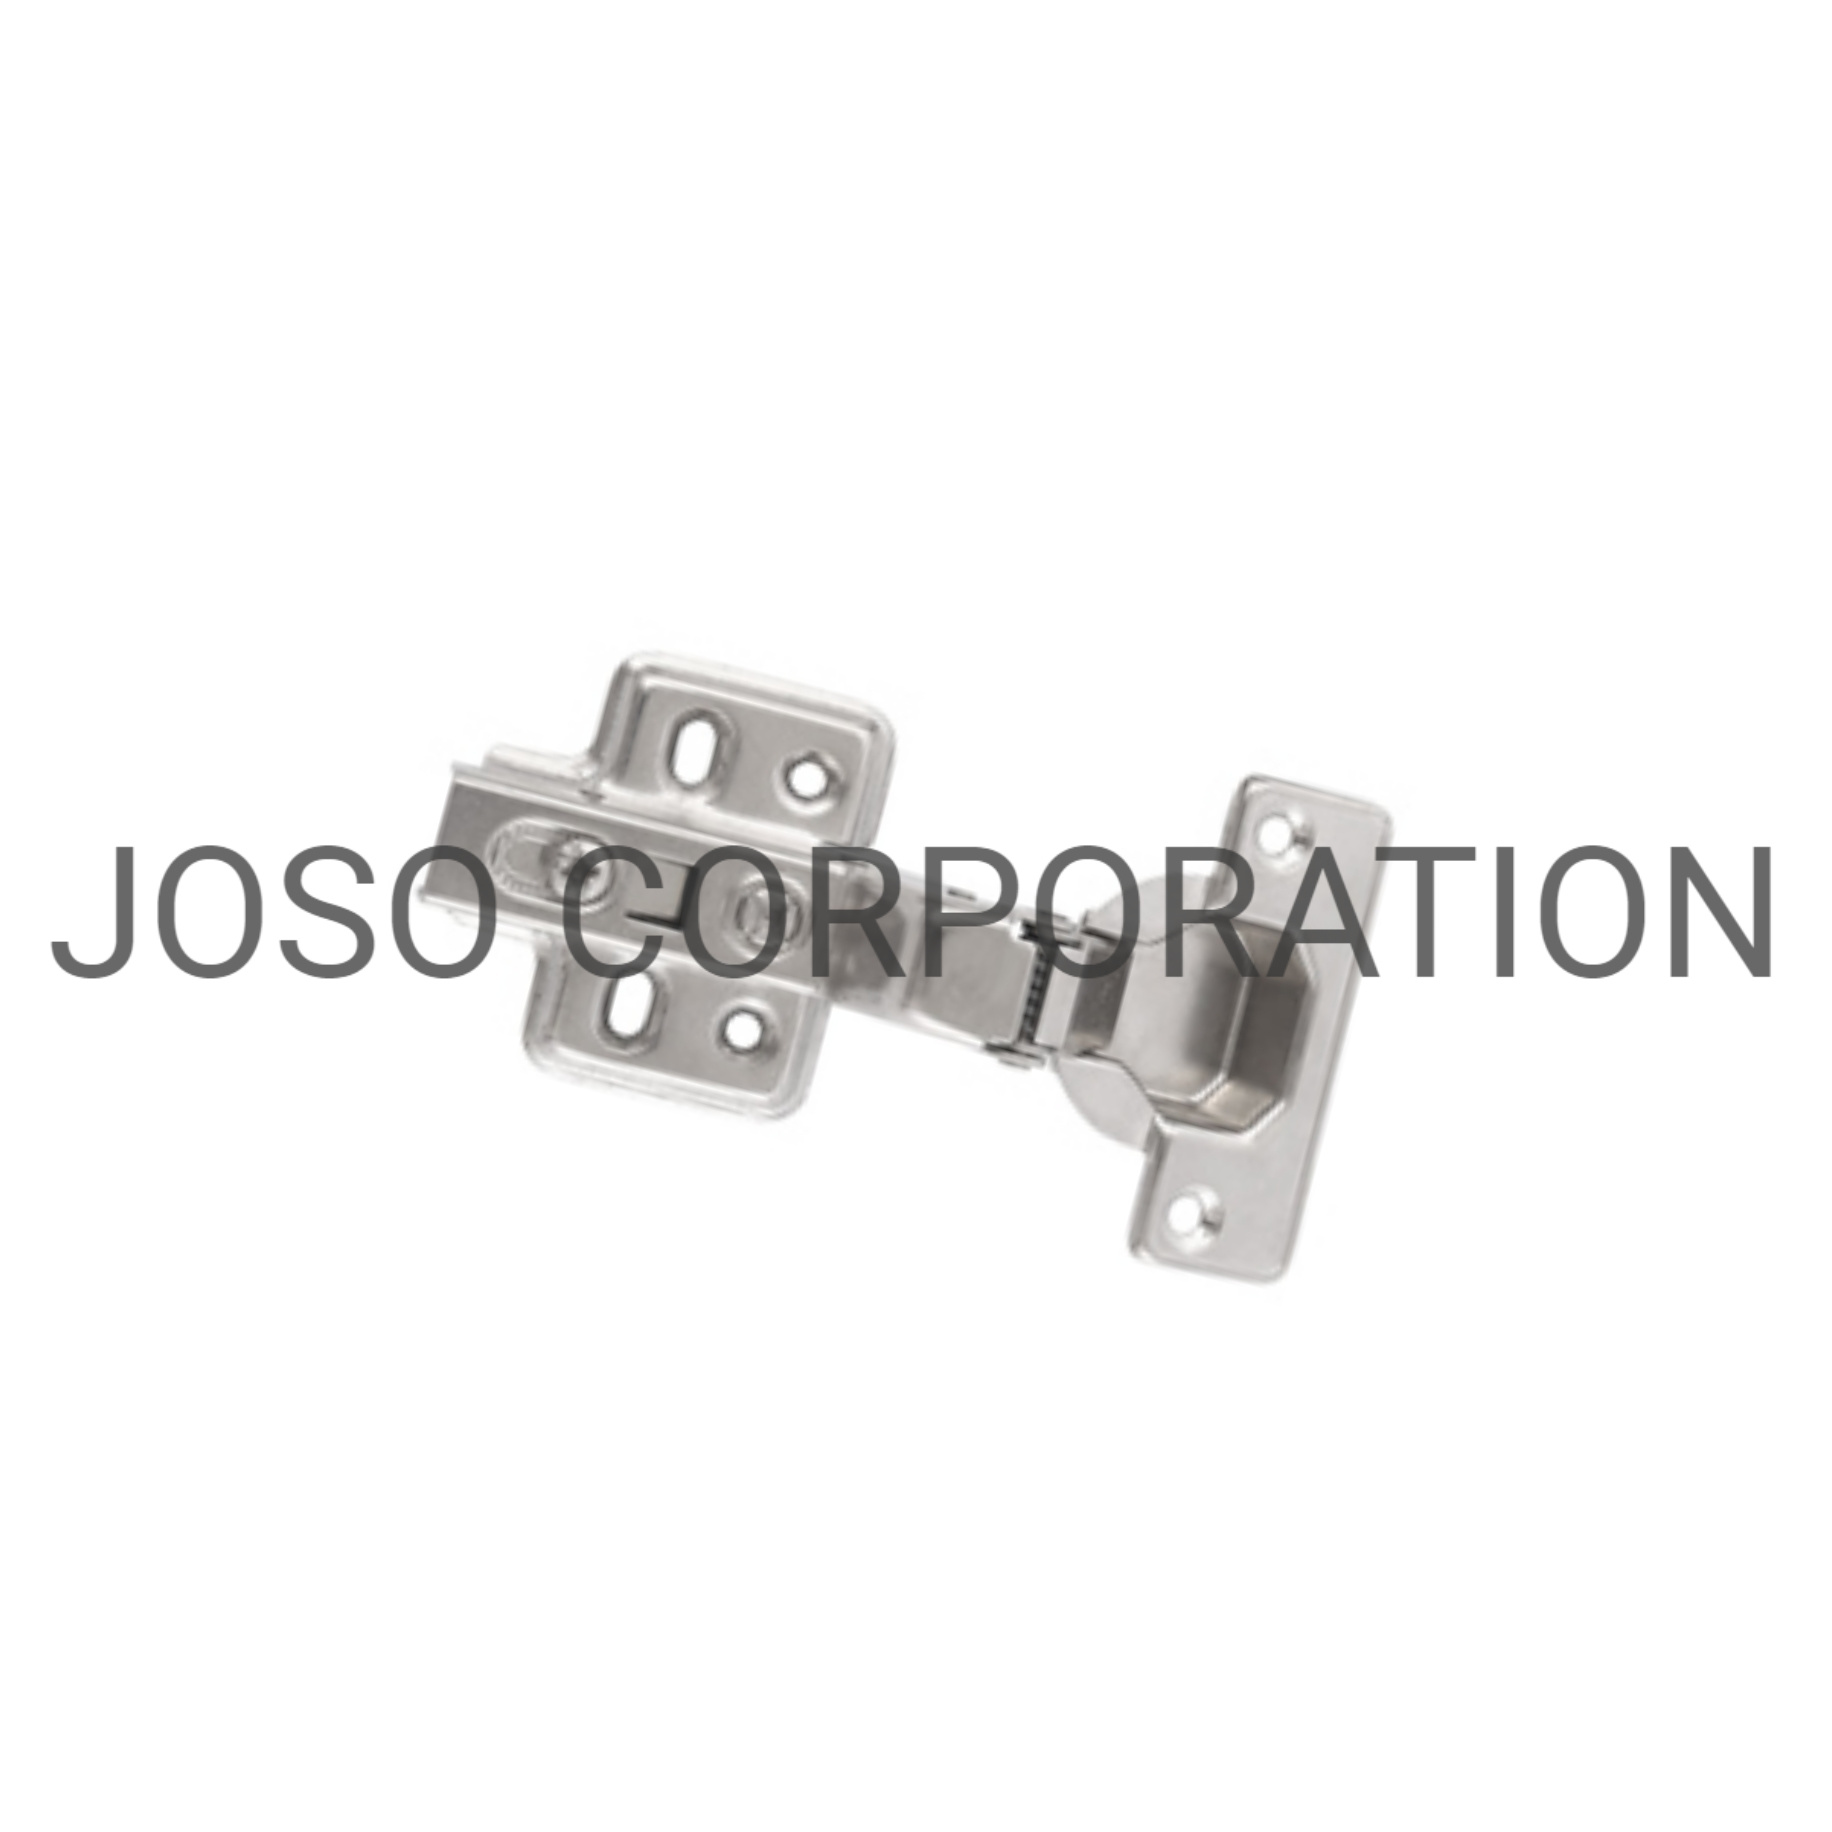 Cup Hinge with Soft Closure 105 Degree Steel Nickel Plated Cabinet Fitting